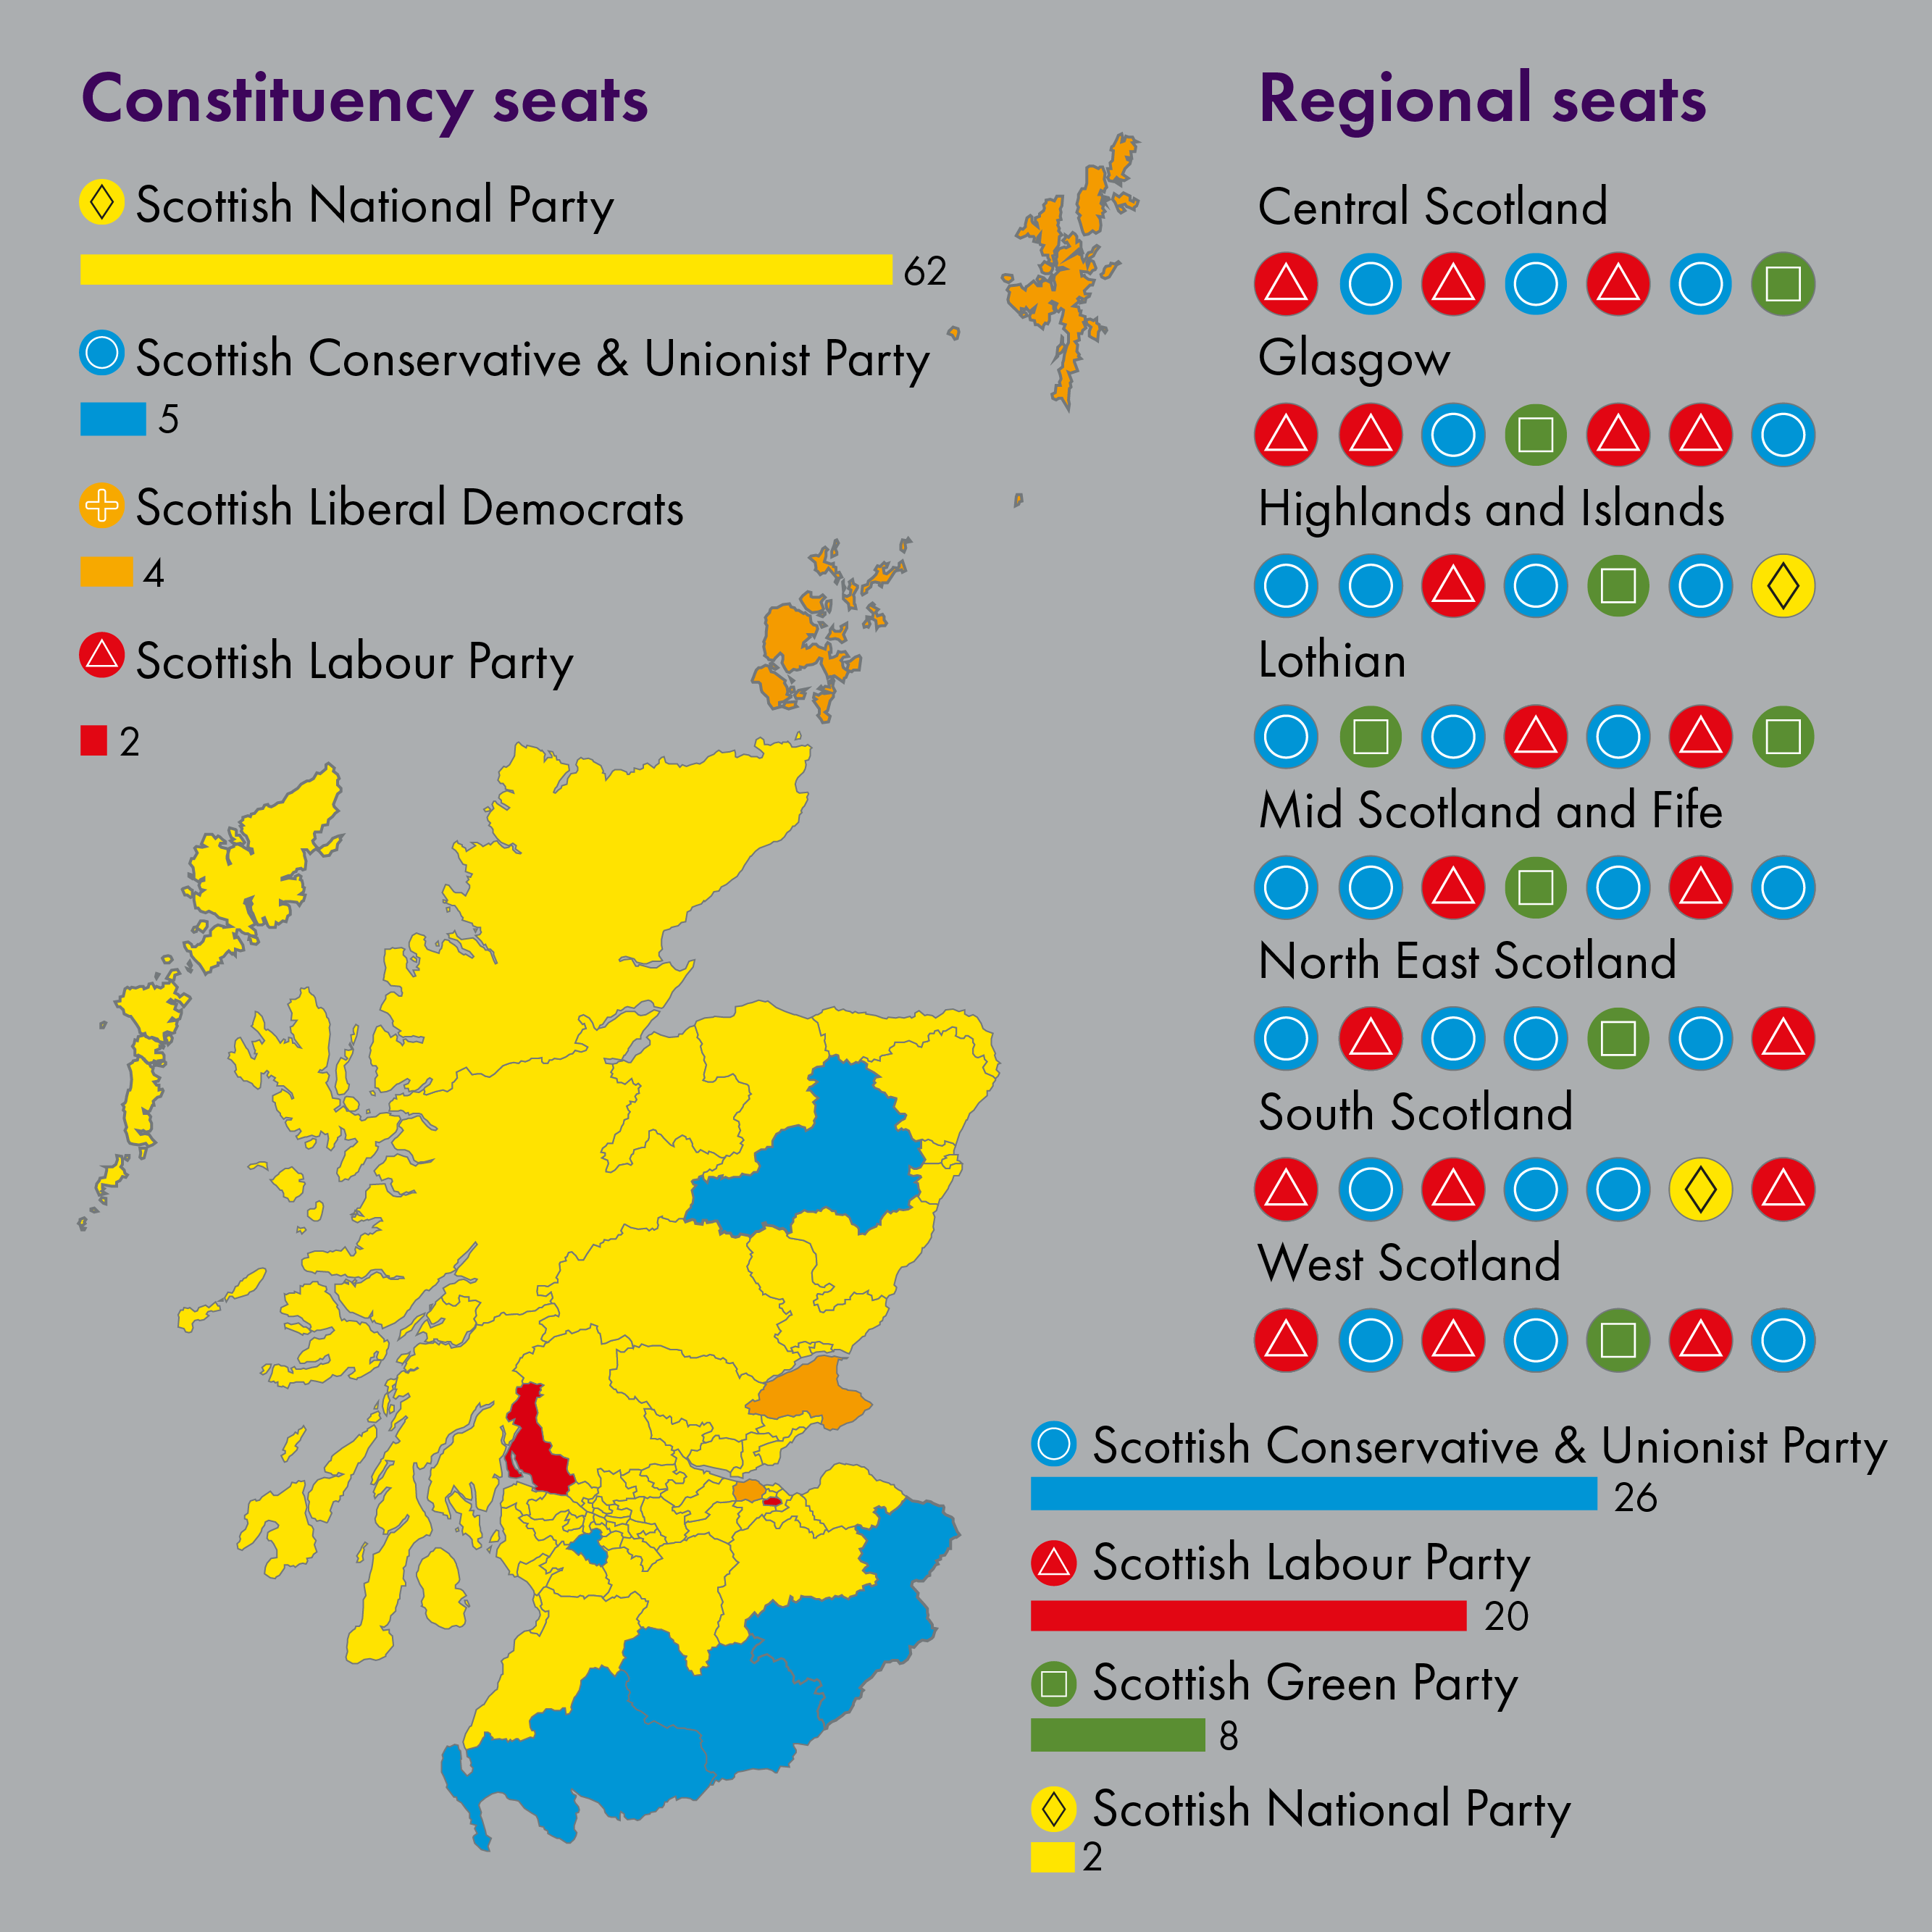 The SNP won 62 out of the 73 constituency seats. The Conservative party won the most regional seats and all of the Green party seats were won from the regional vote.